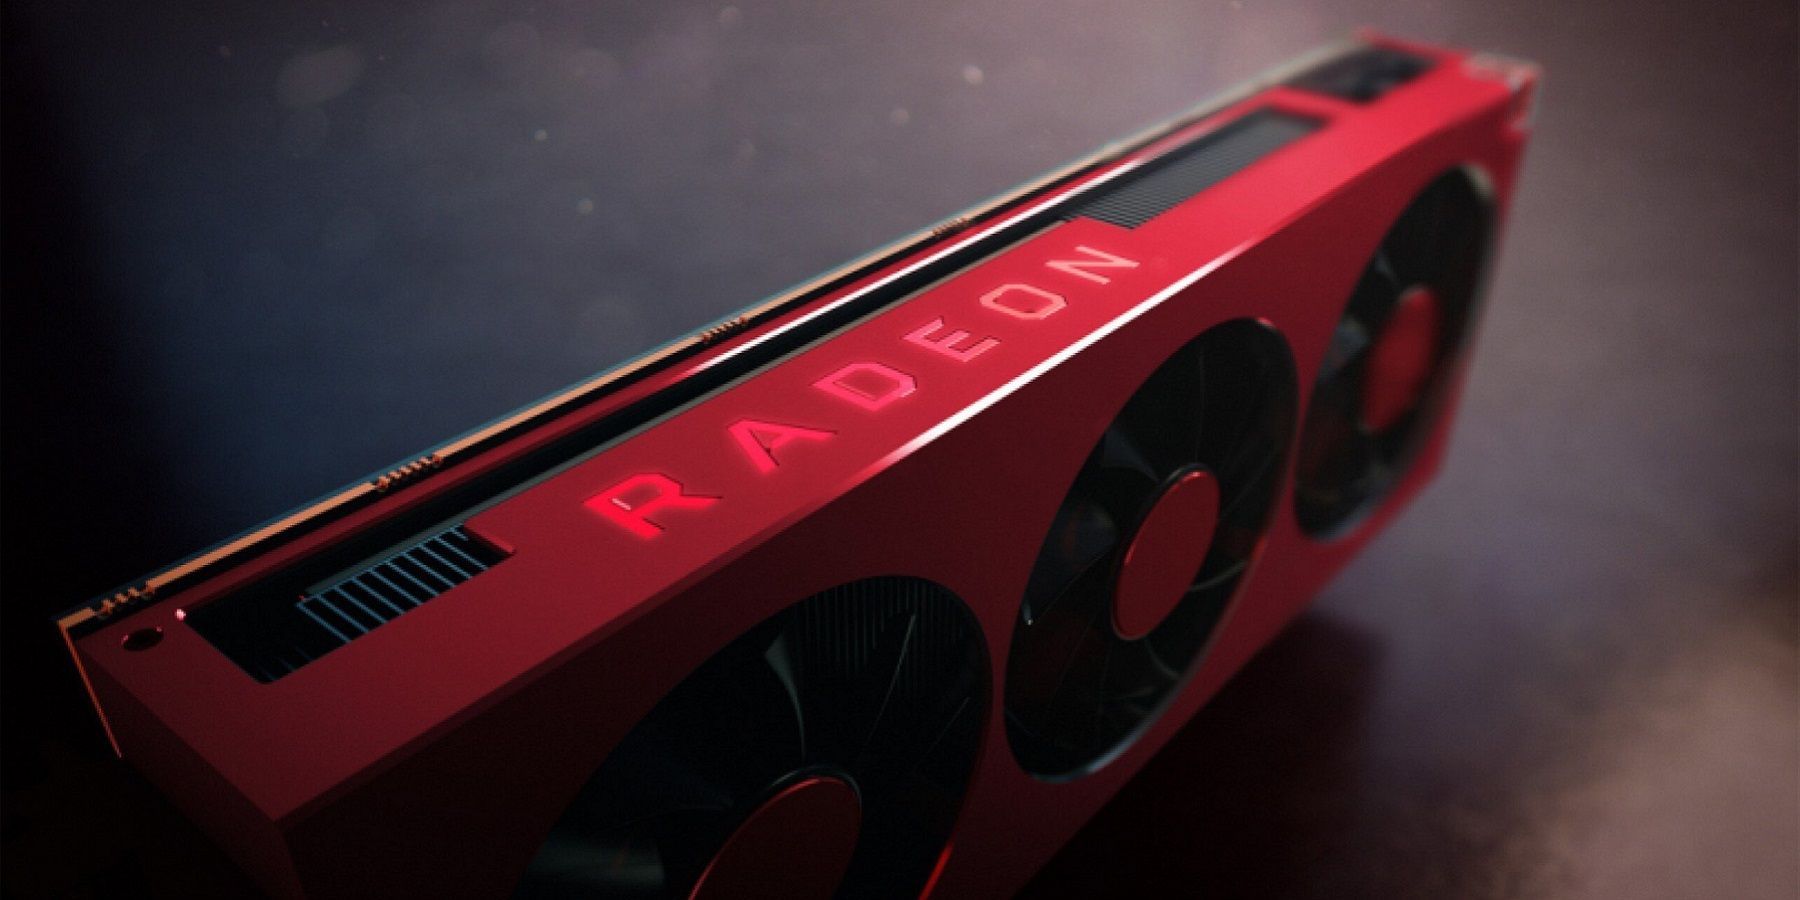 Image of a red AMD Radeon graphics card.